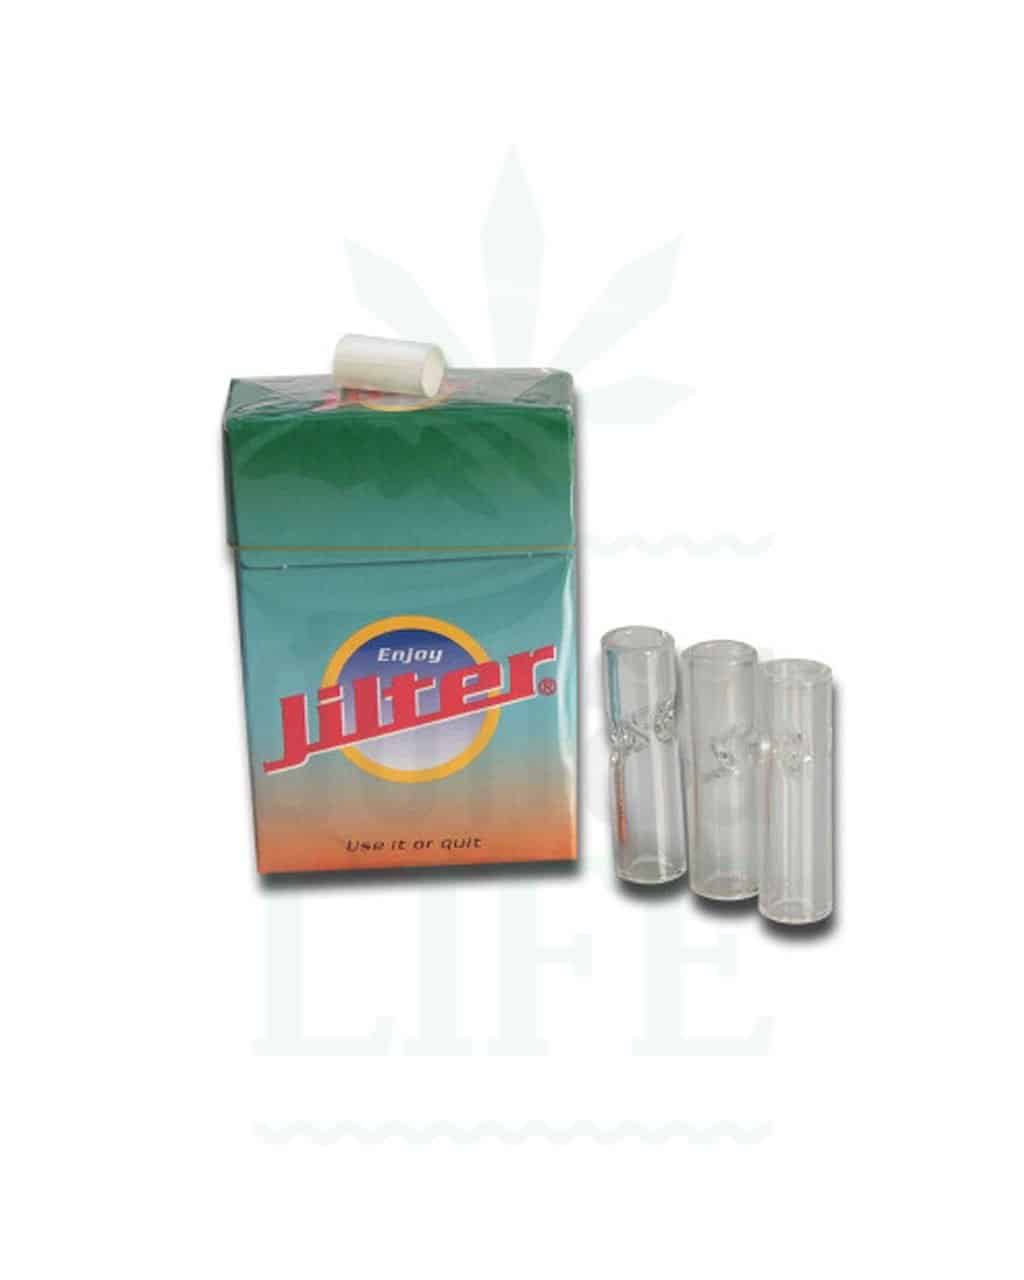 Filter &amp; Activated Carbon JILTER Cigarette Filter with Glass Tips